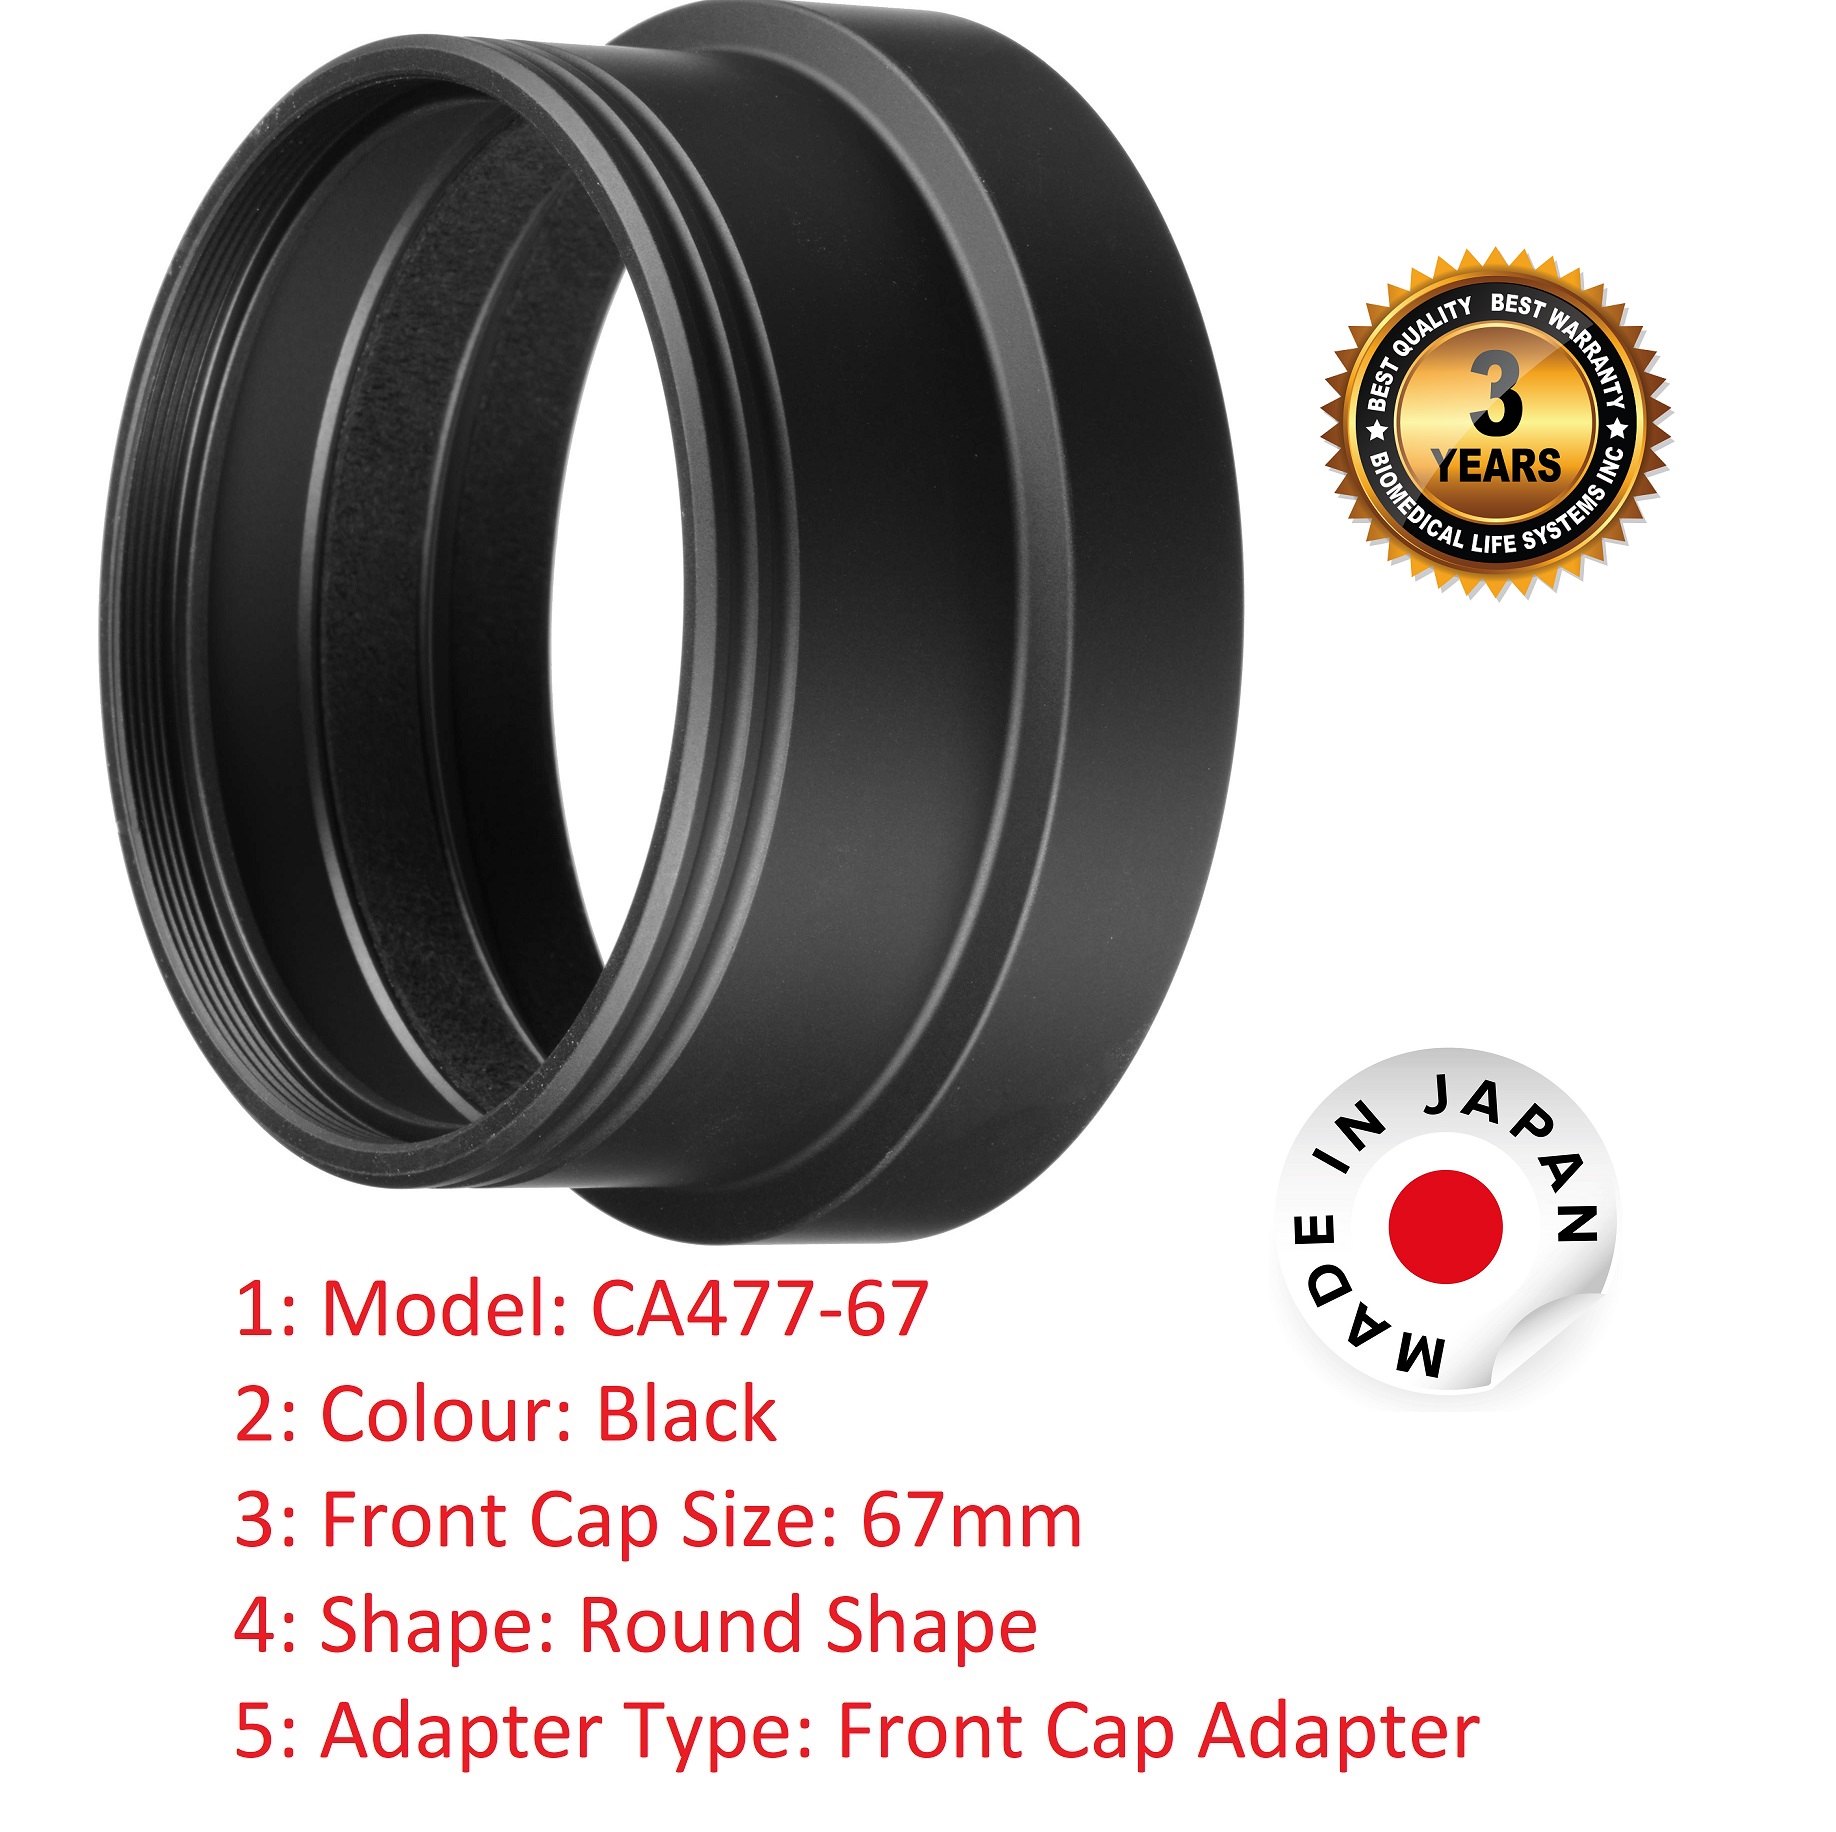 Sigma Front Cap Adapter (CA477-67) For 10mm F2.8 Lens